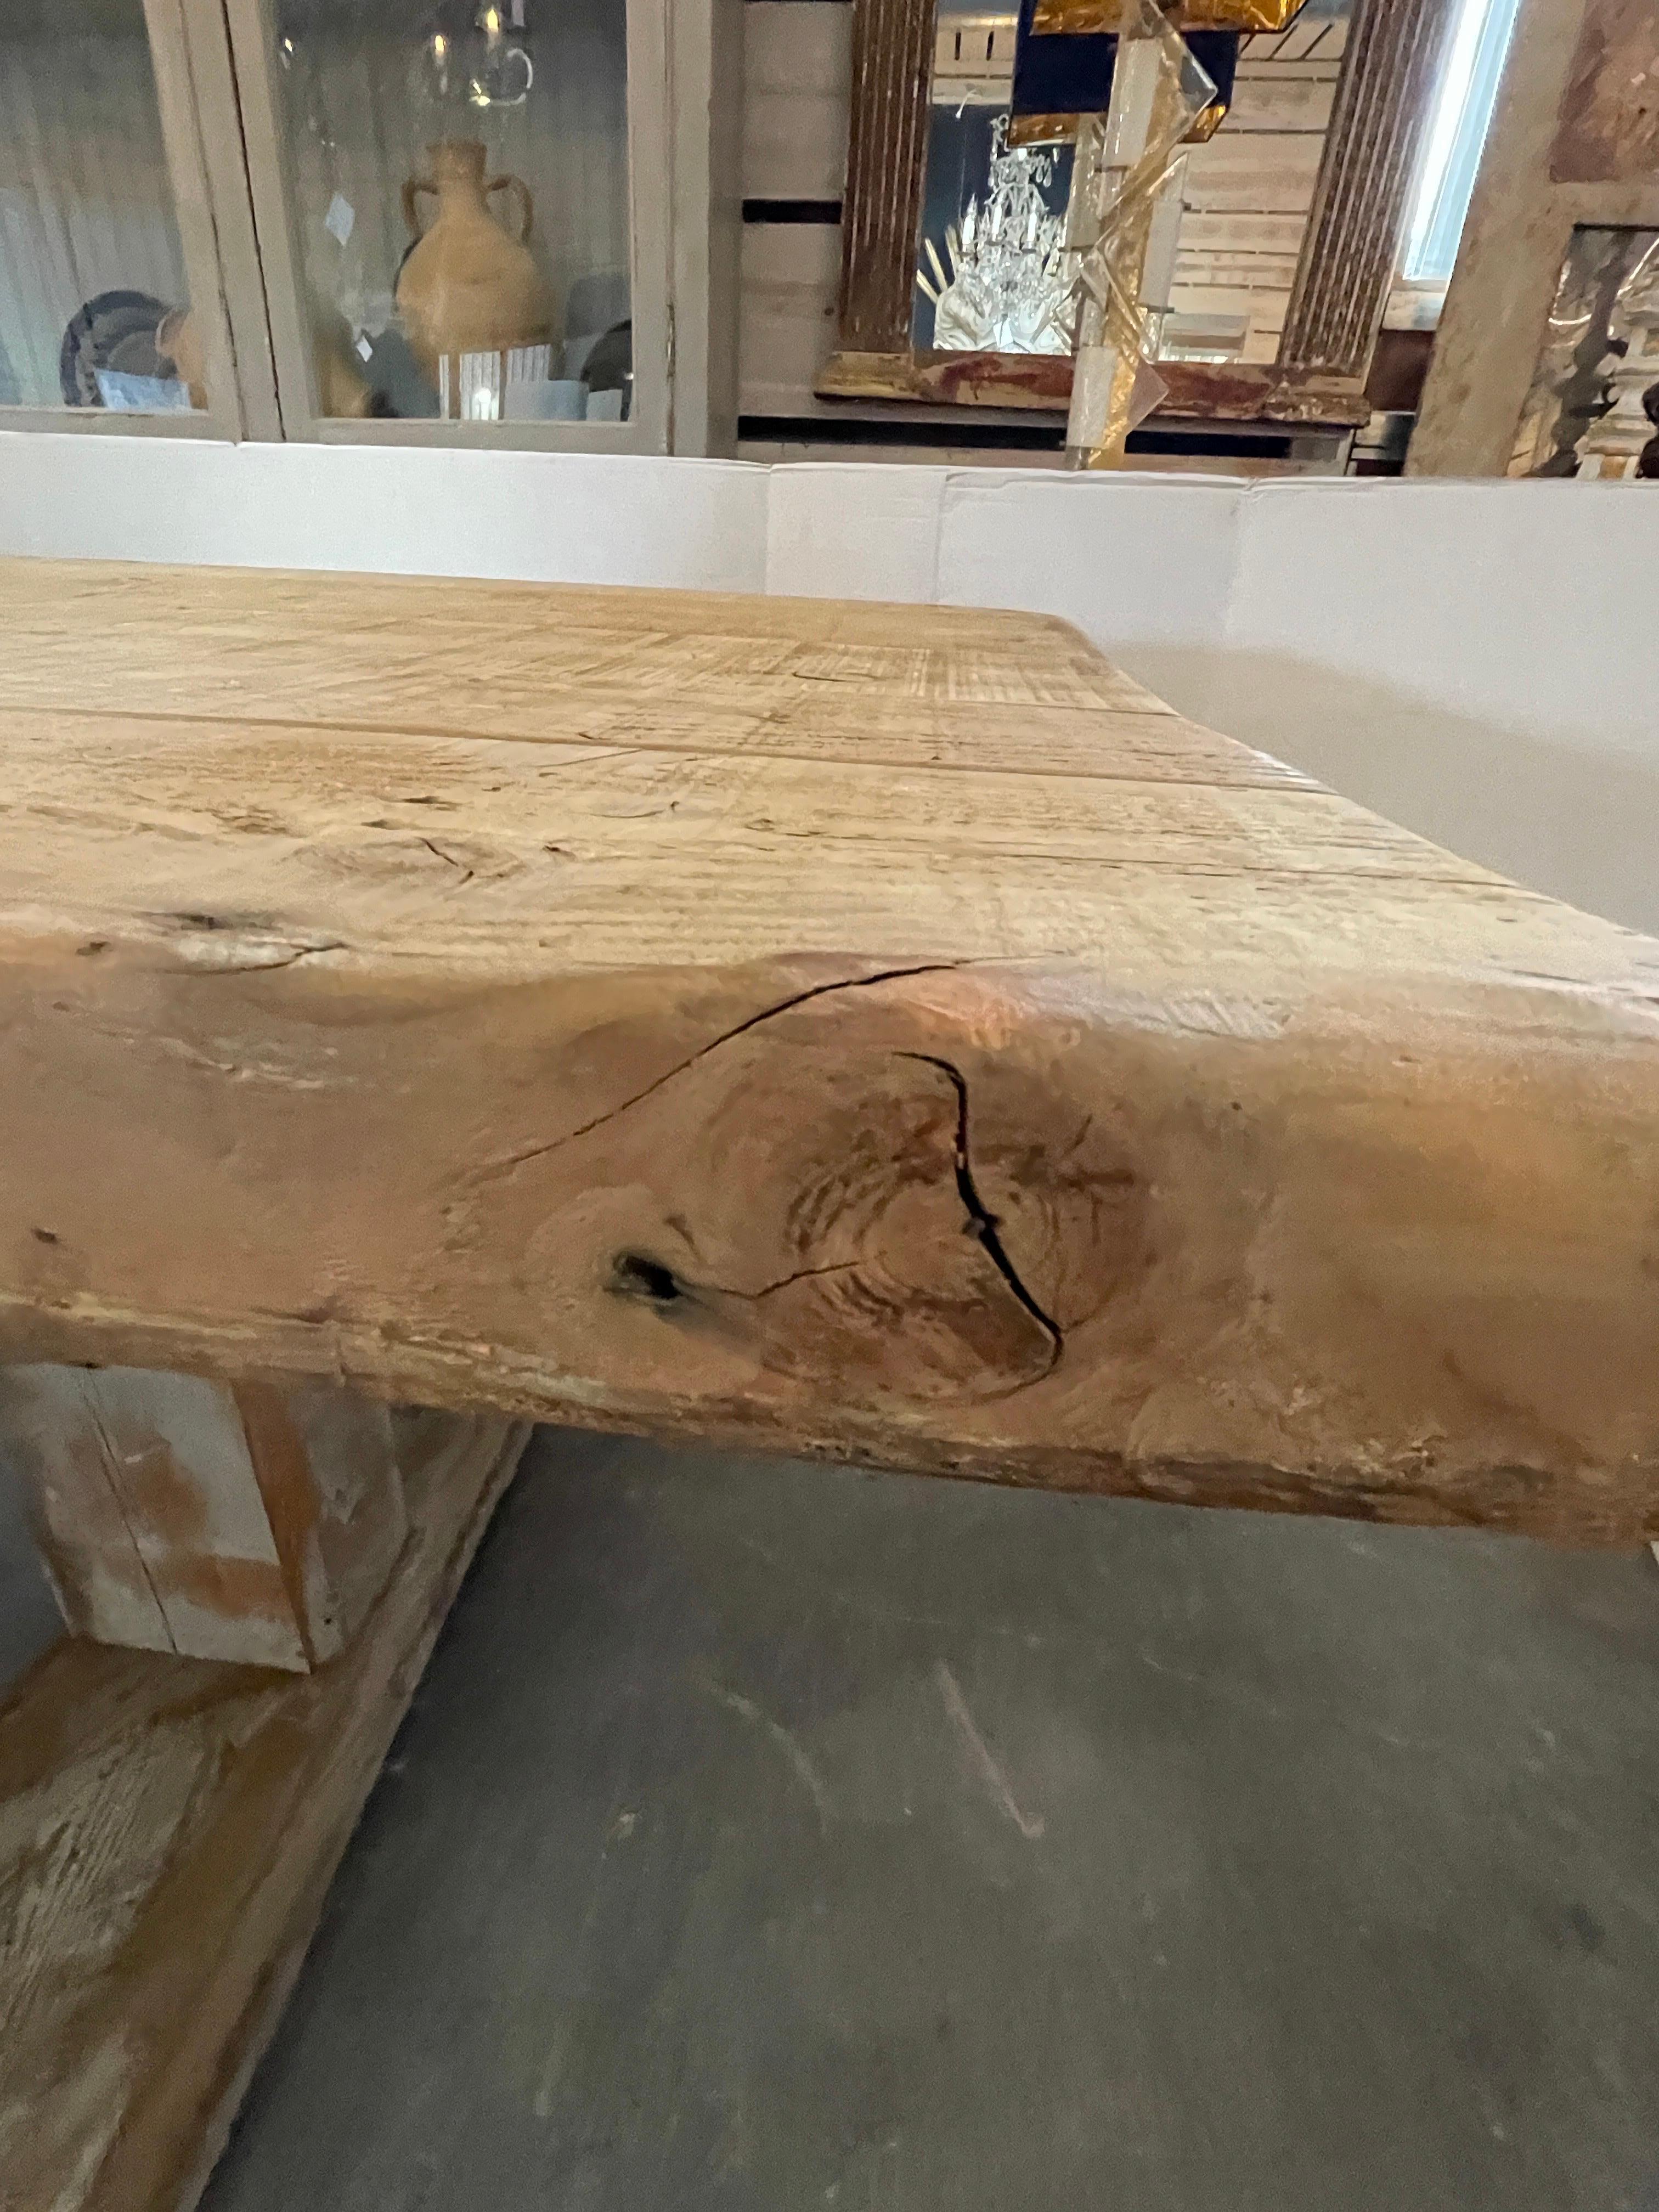 This is a massive pine table that's 13 feet long made from 300 year old columns from England.  The wood top is about 3' thick and the knotting is beautiful throughout the table. It's base is lightly painted a french blue that shows much of the